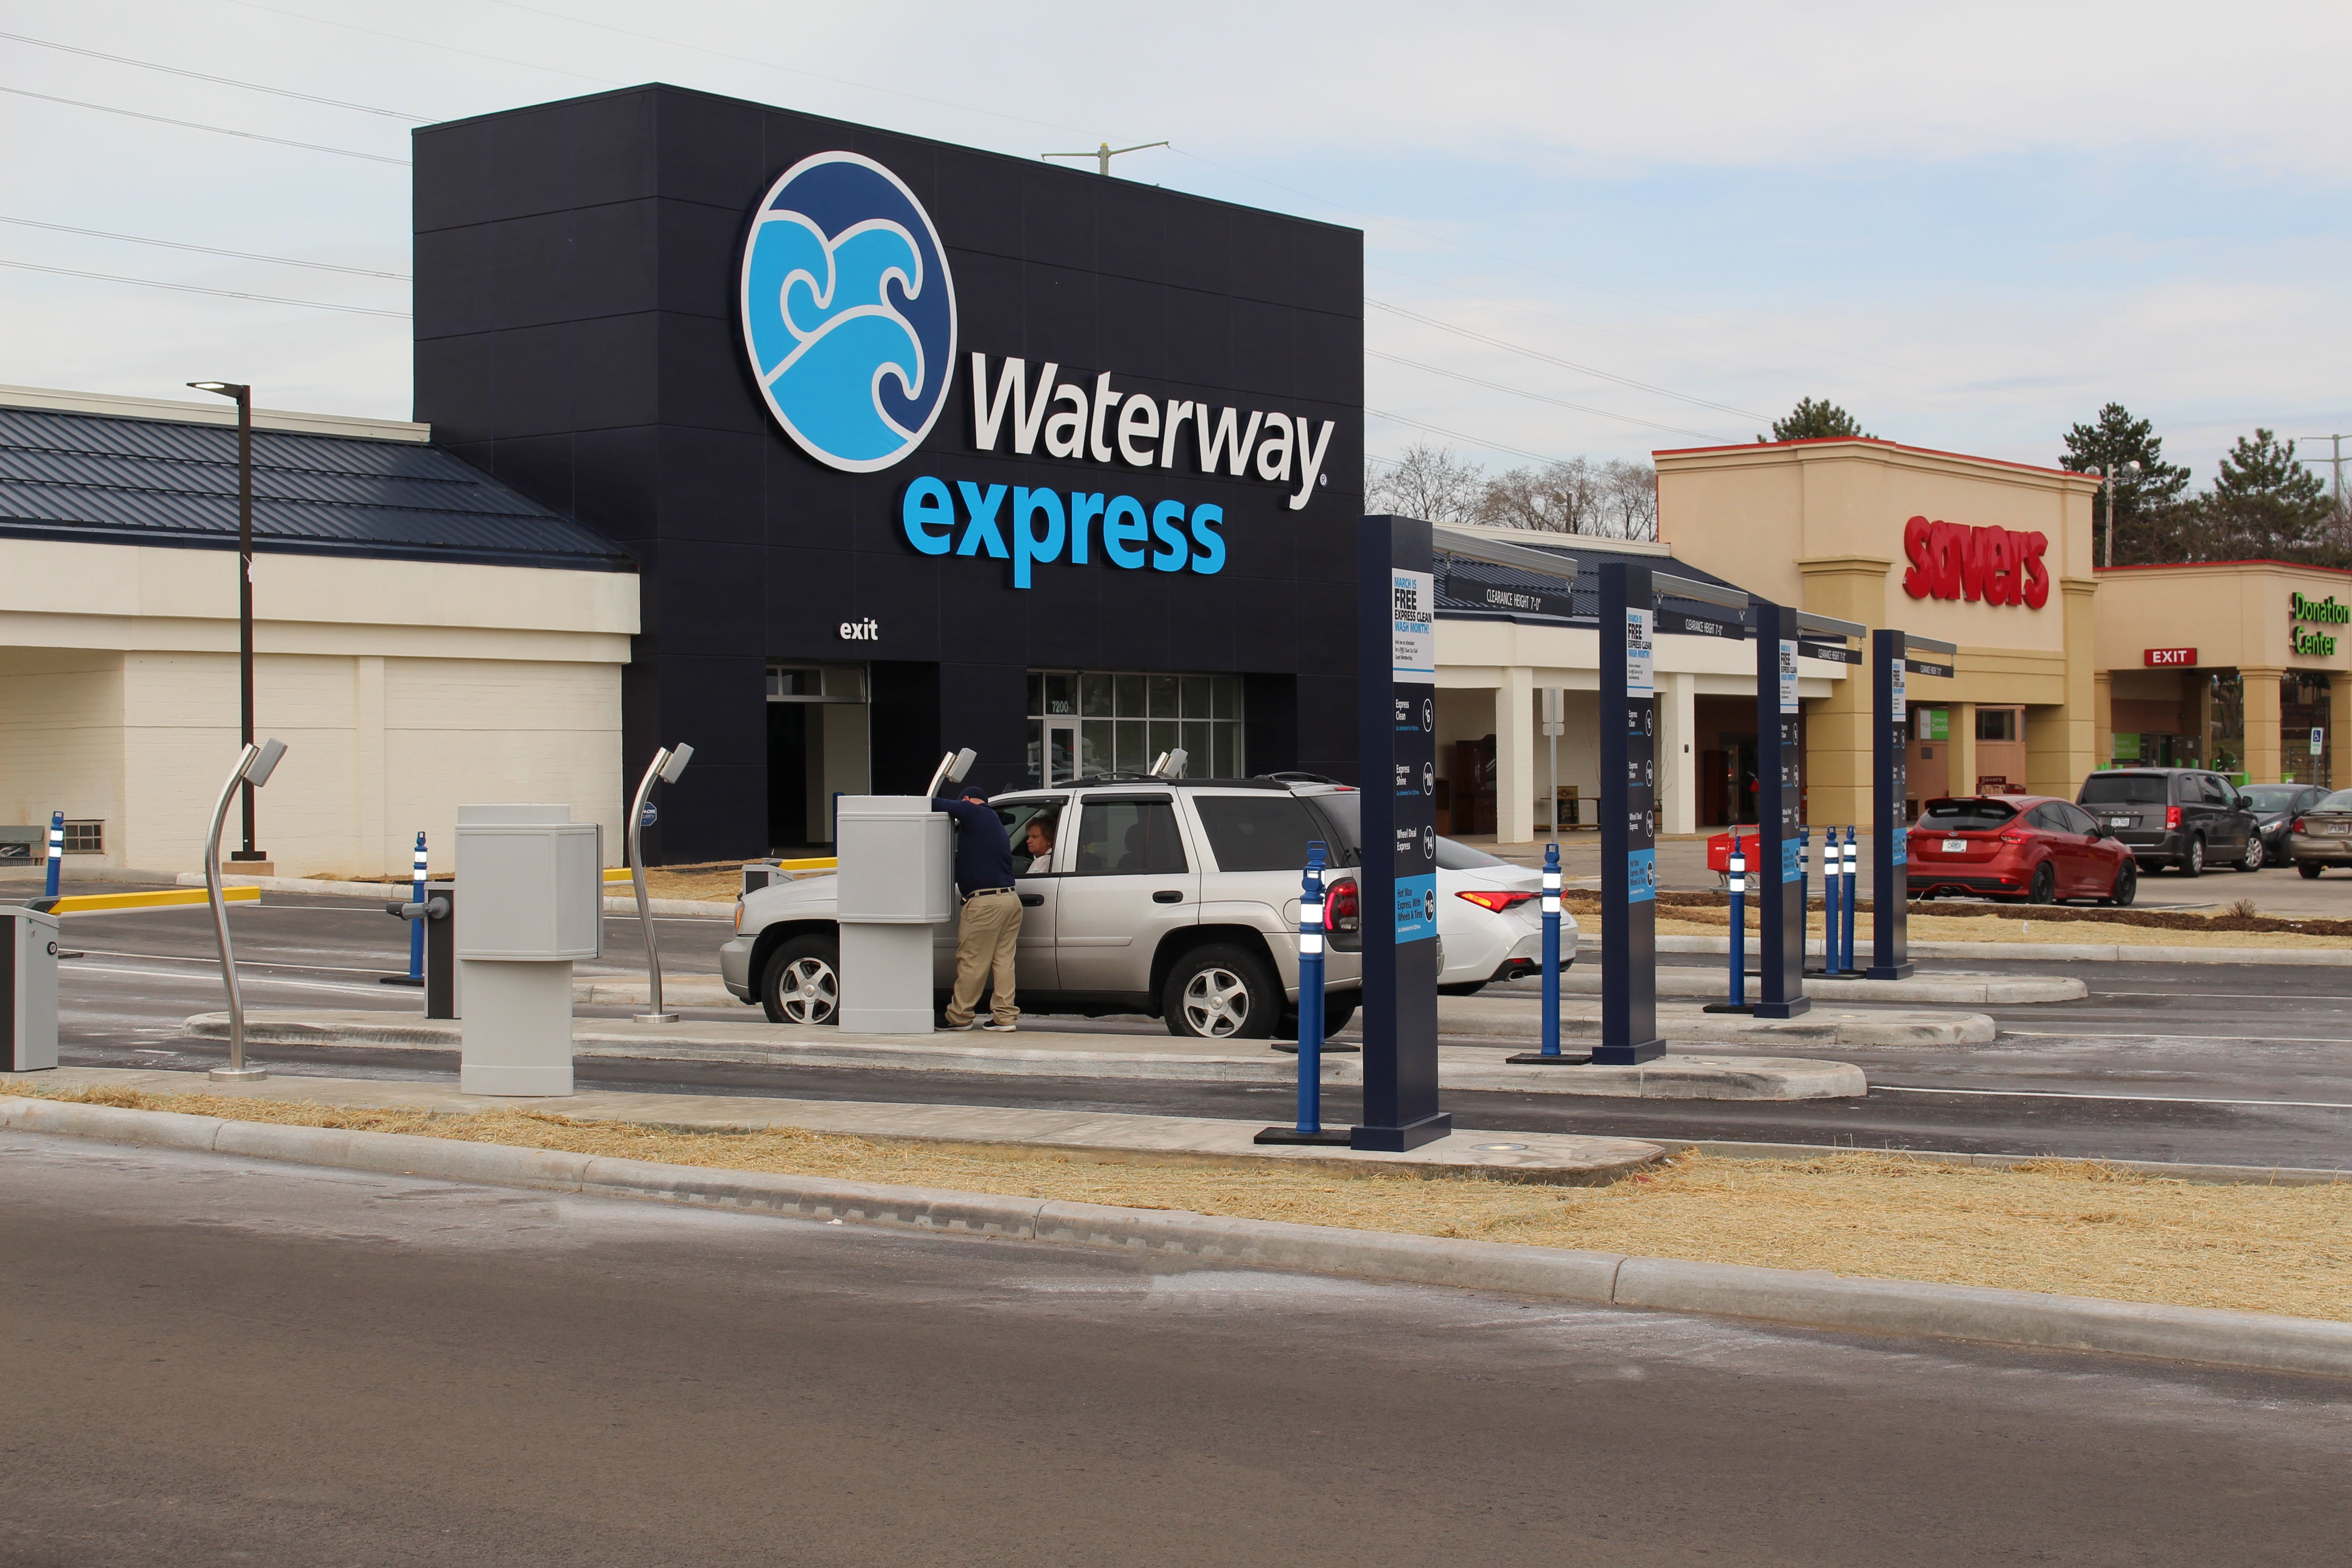 Exterior and interior photos of the Waterway Express in Cleveland, OH